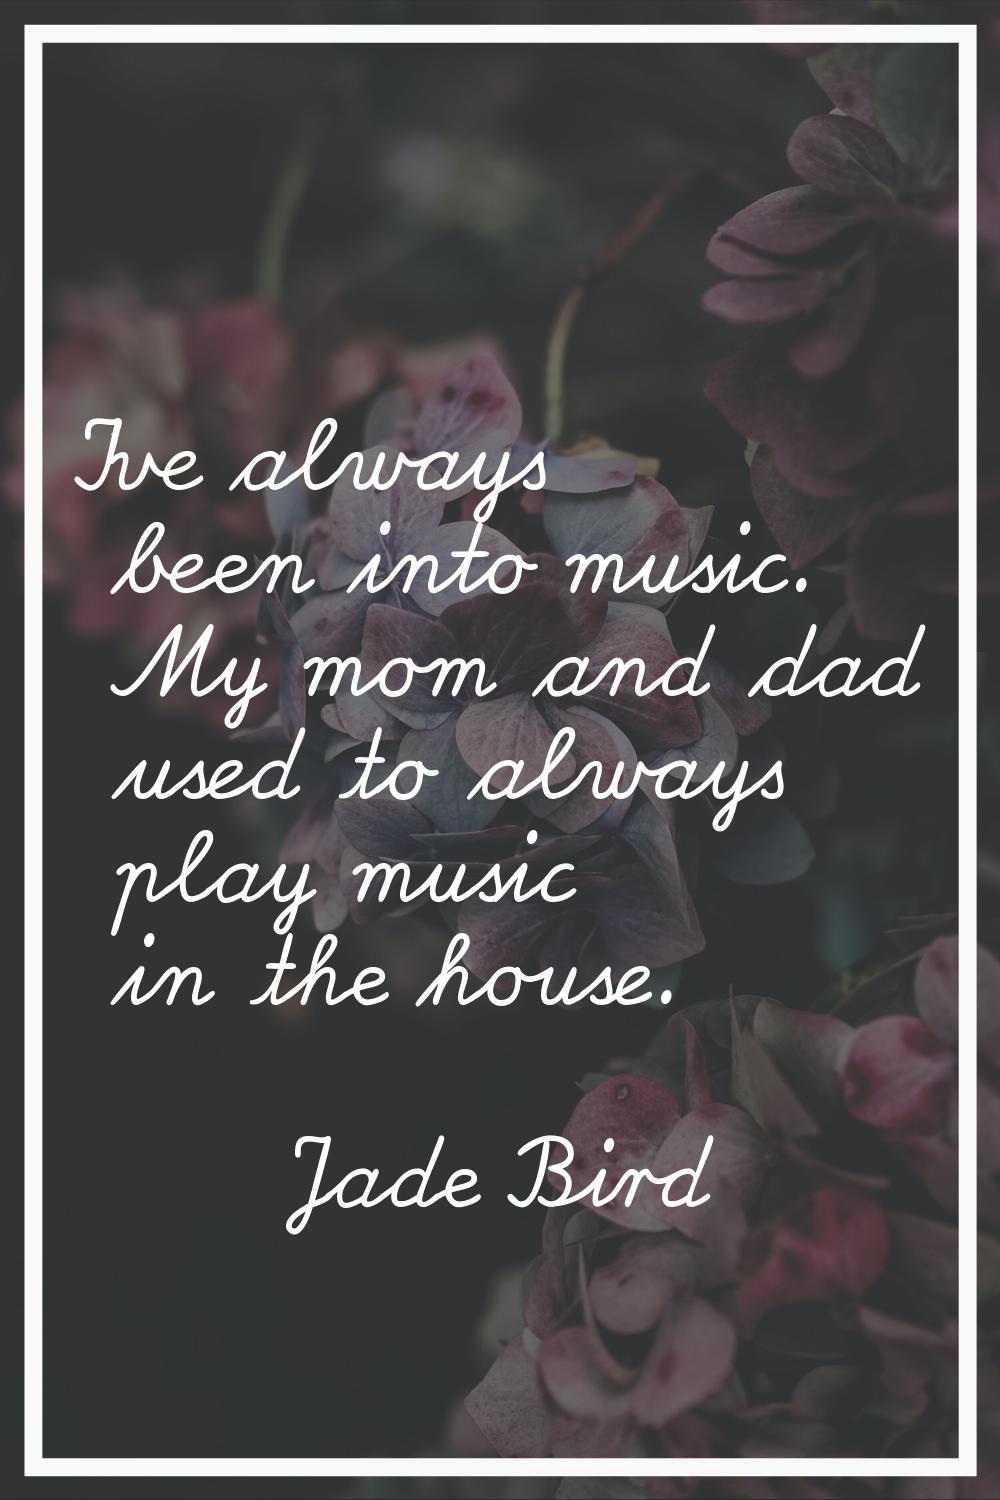 I’ve always been into music. My mom and dad used to always play music in the house.